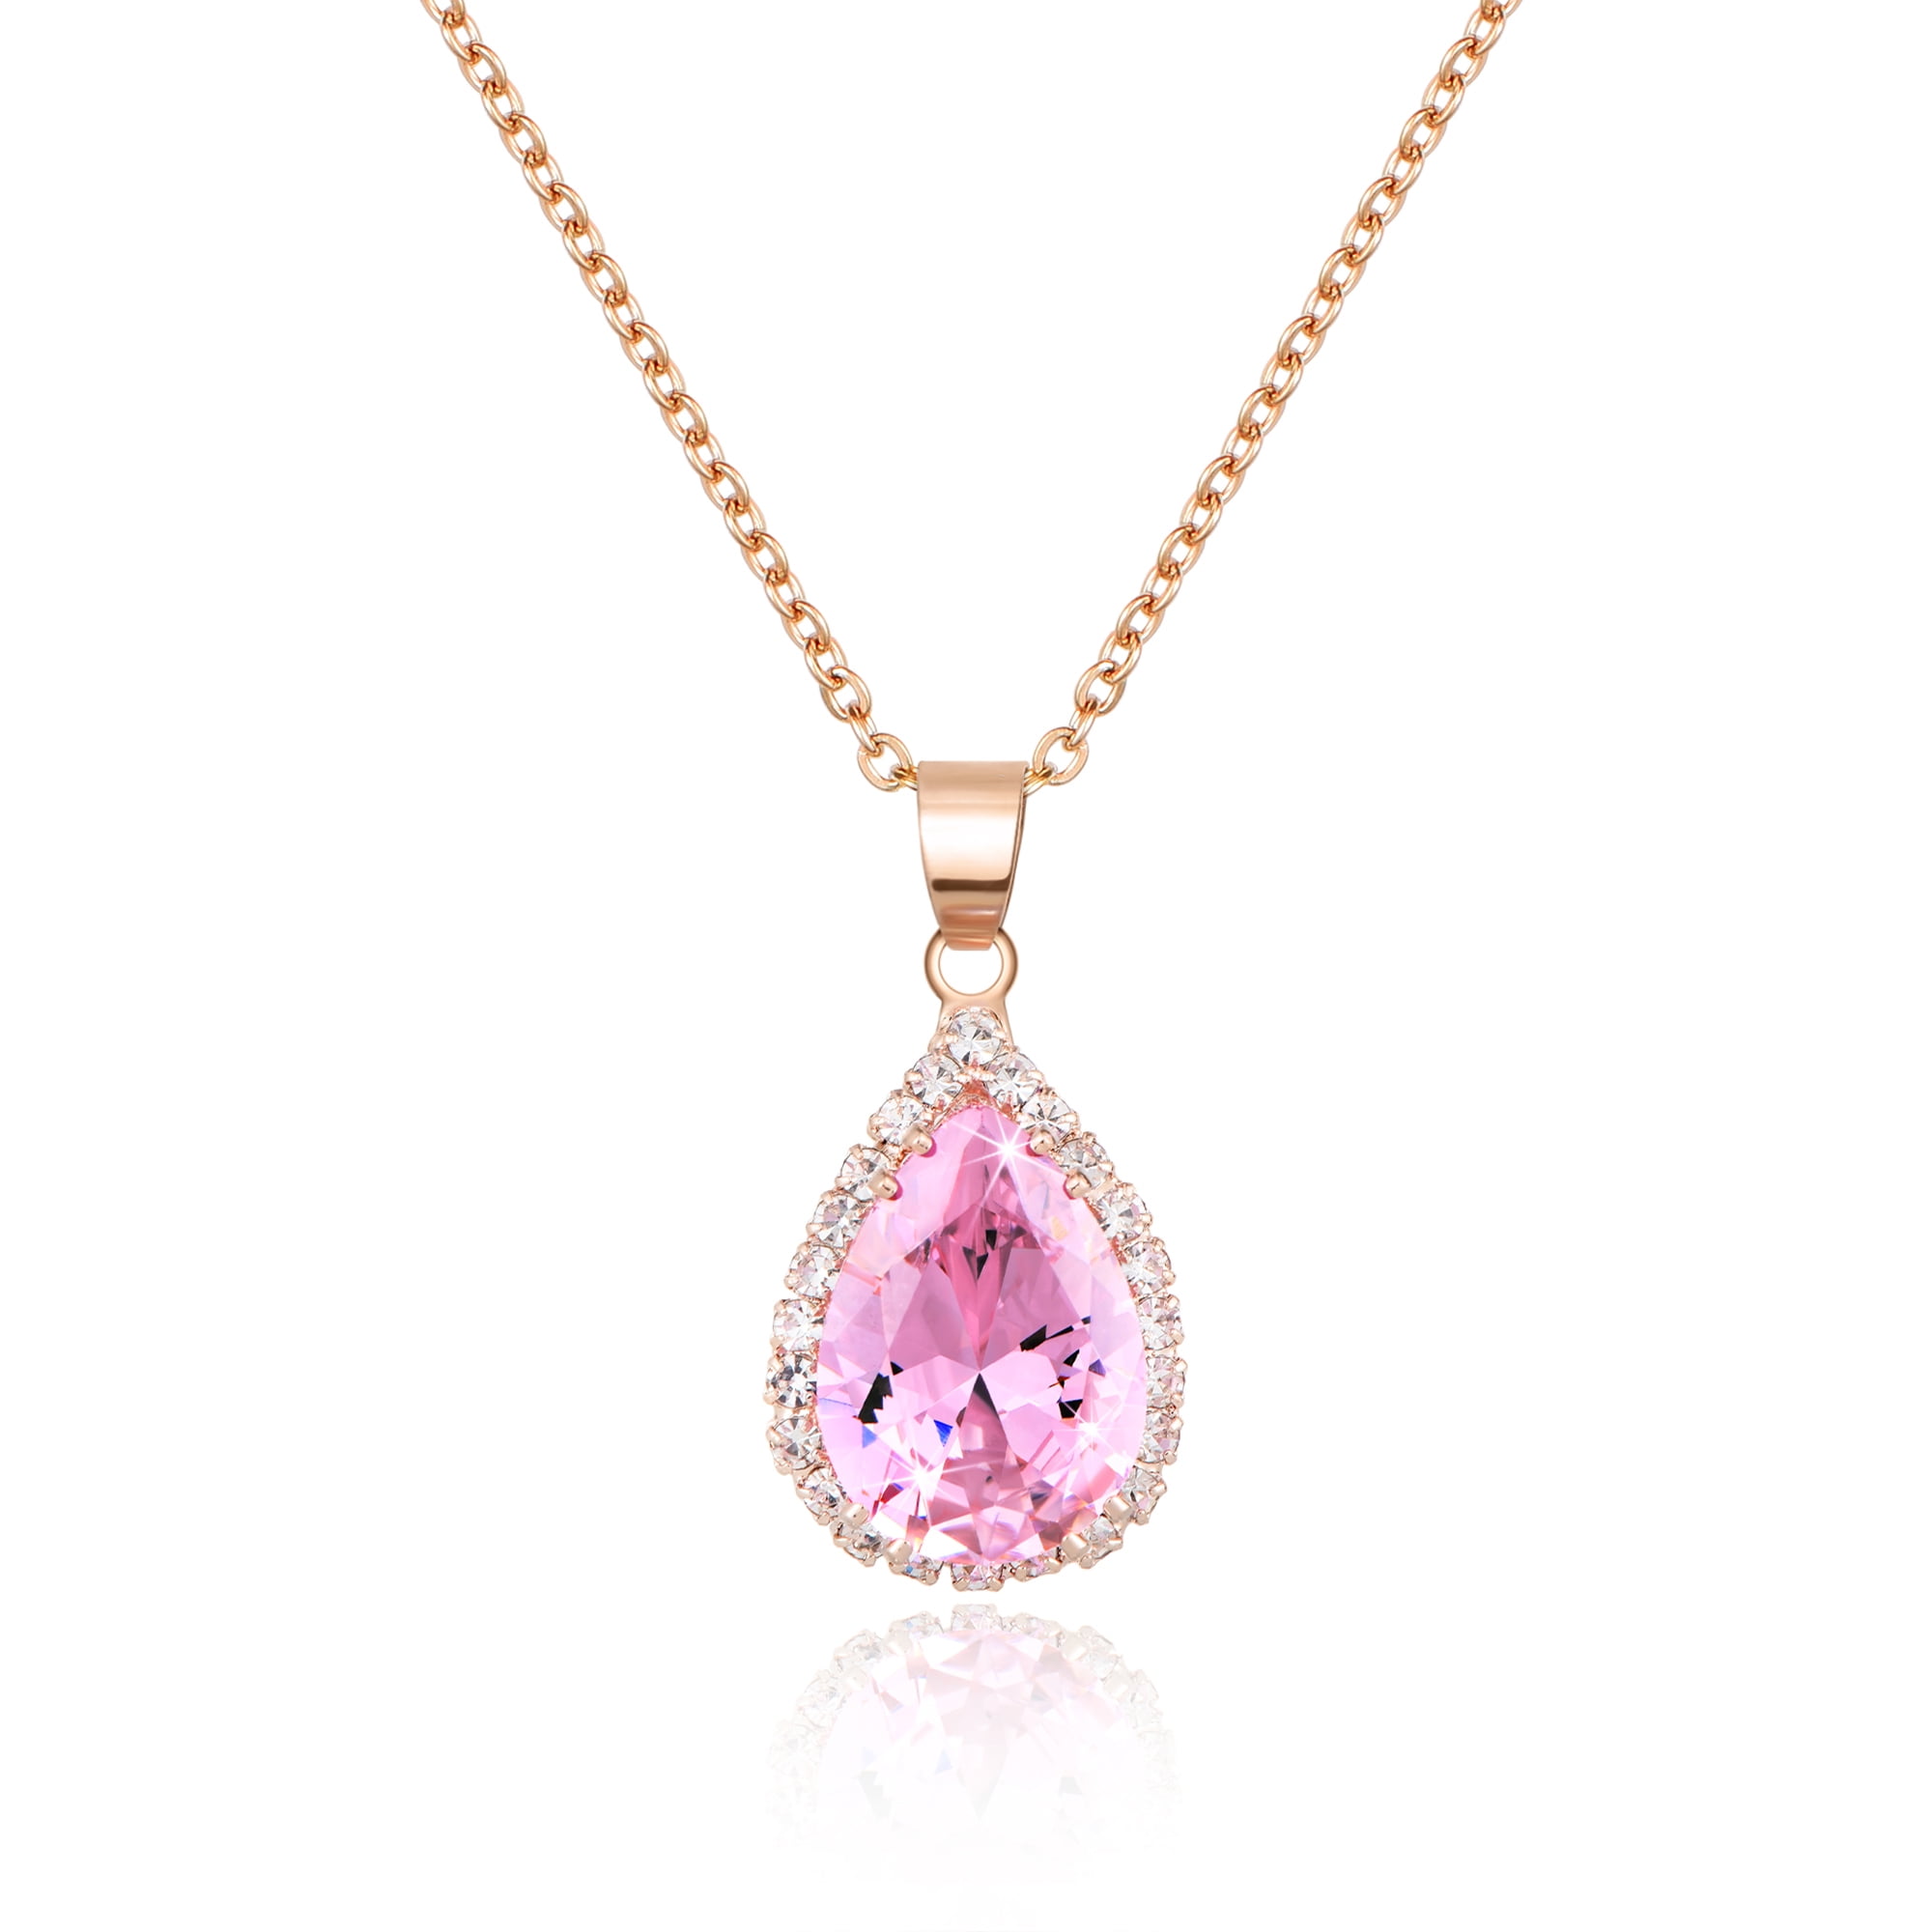 NOT FADE Small Pink Crystal Charm Necklace Chain Gold Color 316L